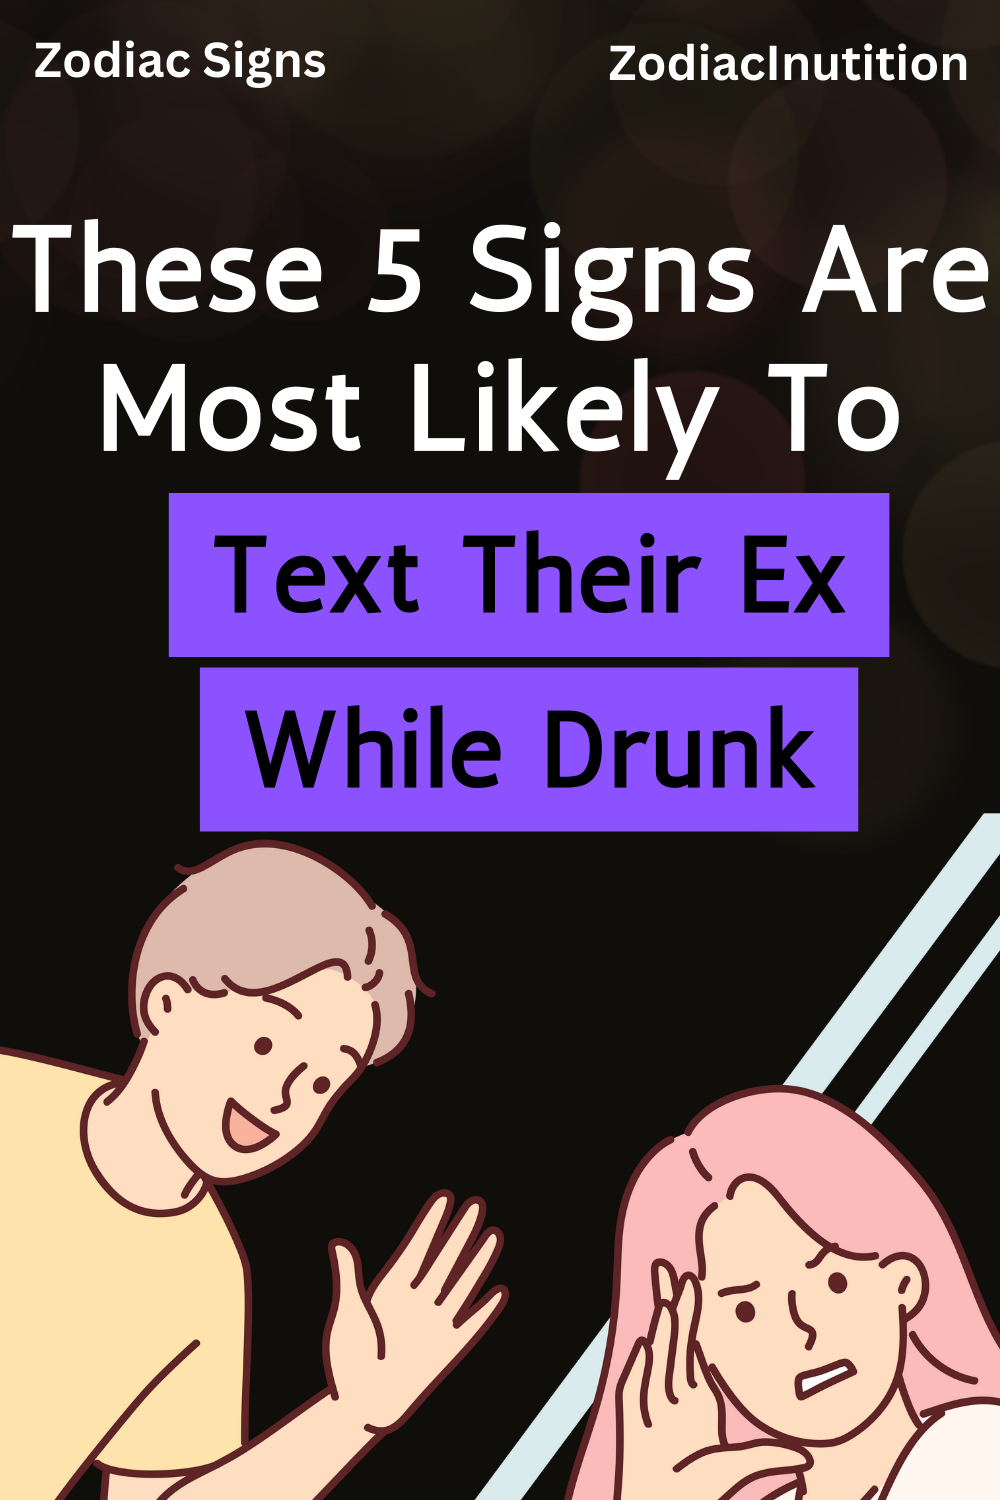 These 5 Signs Are Most Likely To Text Their Ex While Drunk